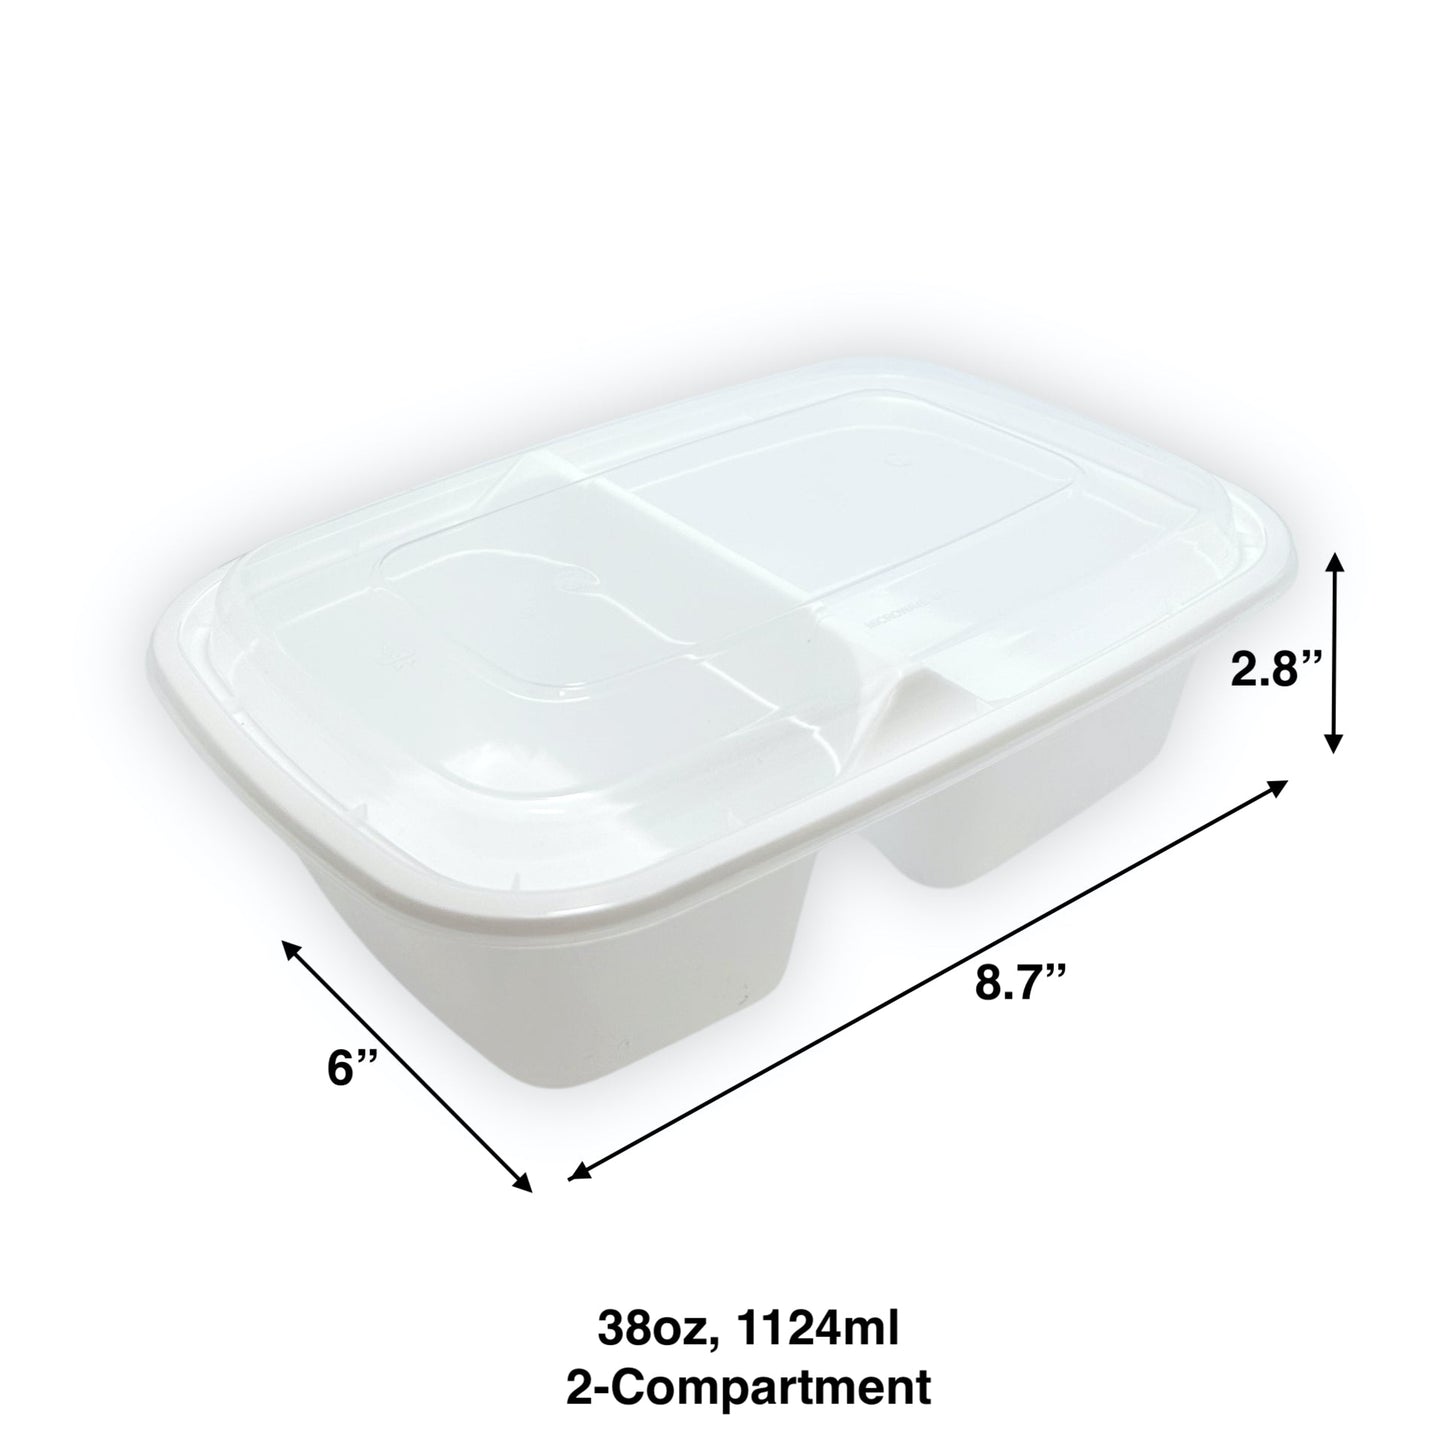 KIS-KY238G | 150sets 38oz, 1124ml 2-Compartment White PP Rectangle Container with Clear Lids Combo; $0.216/set